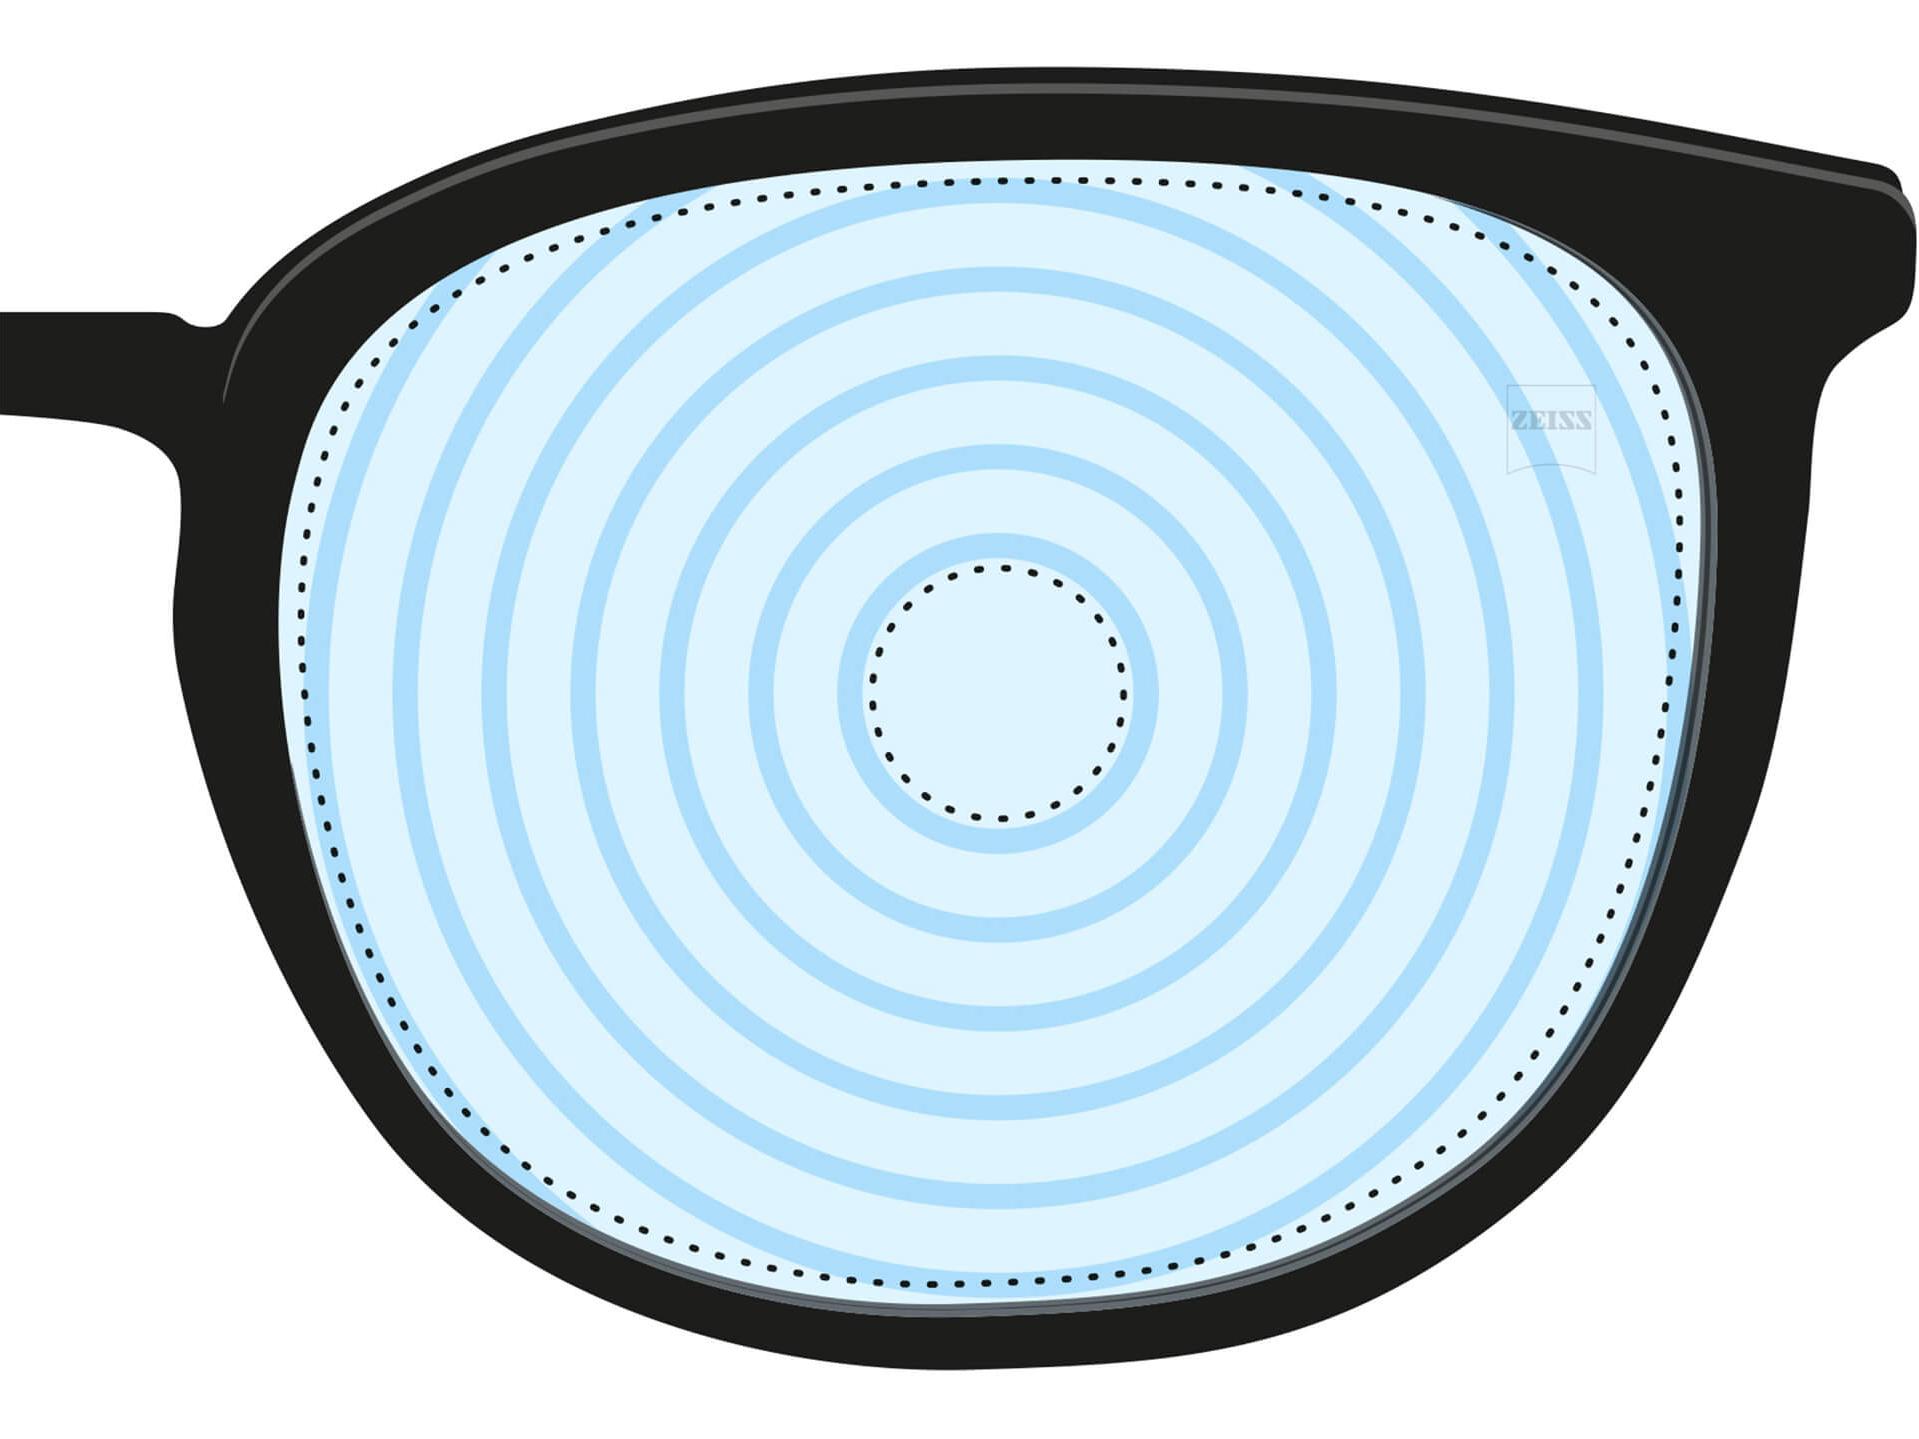 An illustration of a myopia management lens. It has concentric circles that represent different lens powers. It is an example of a lens design for specialized purpose.